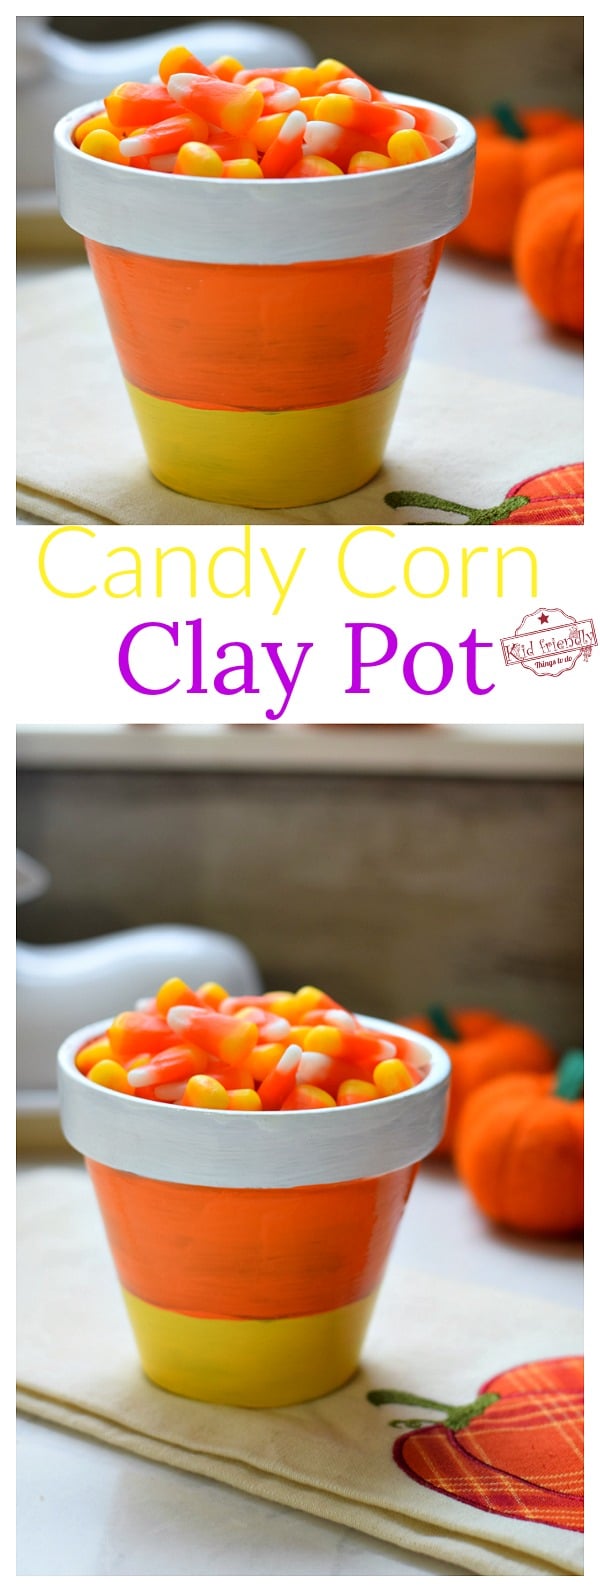 Candy Corn Clay Pot Craft for Fall and Halloween